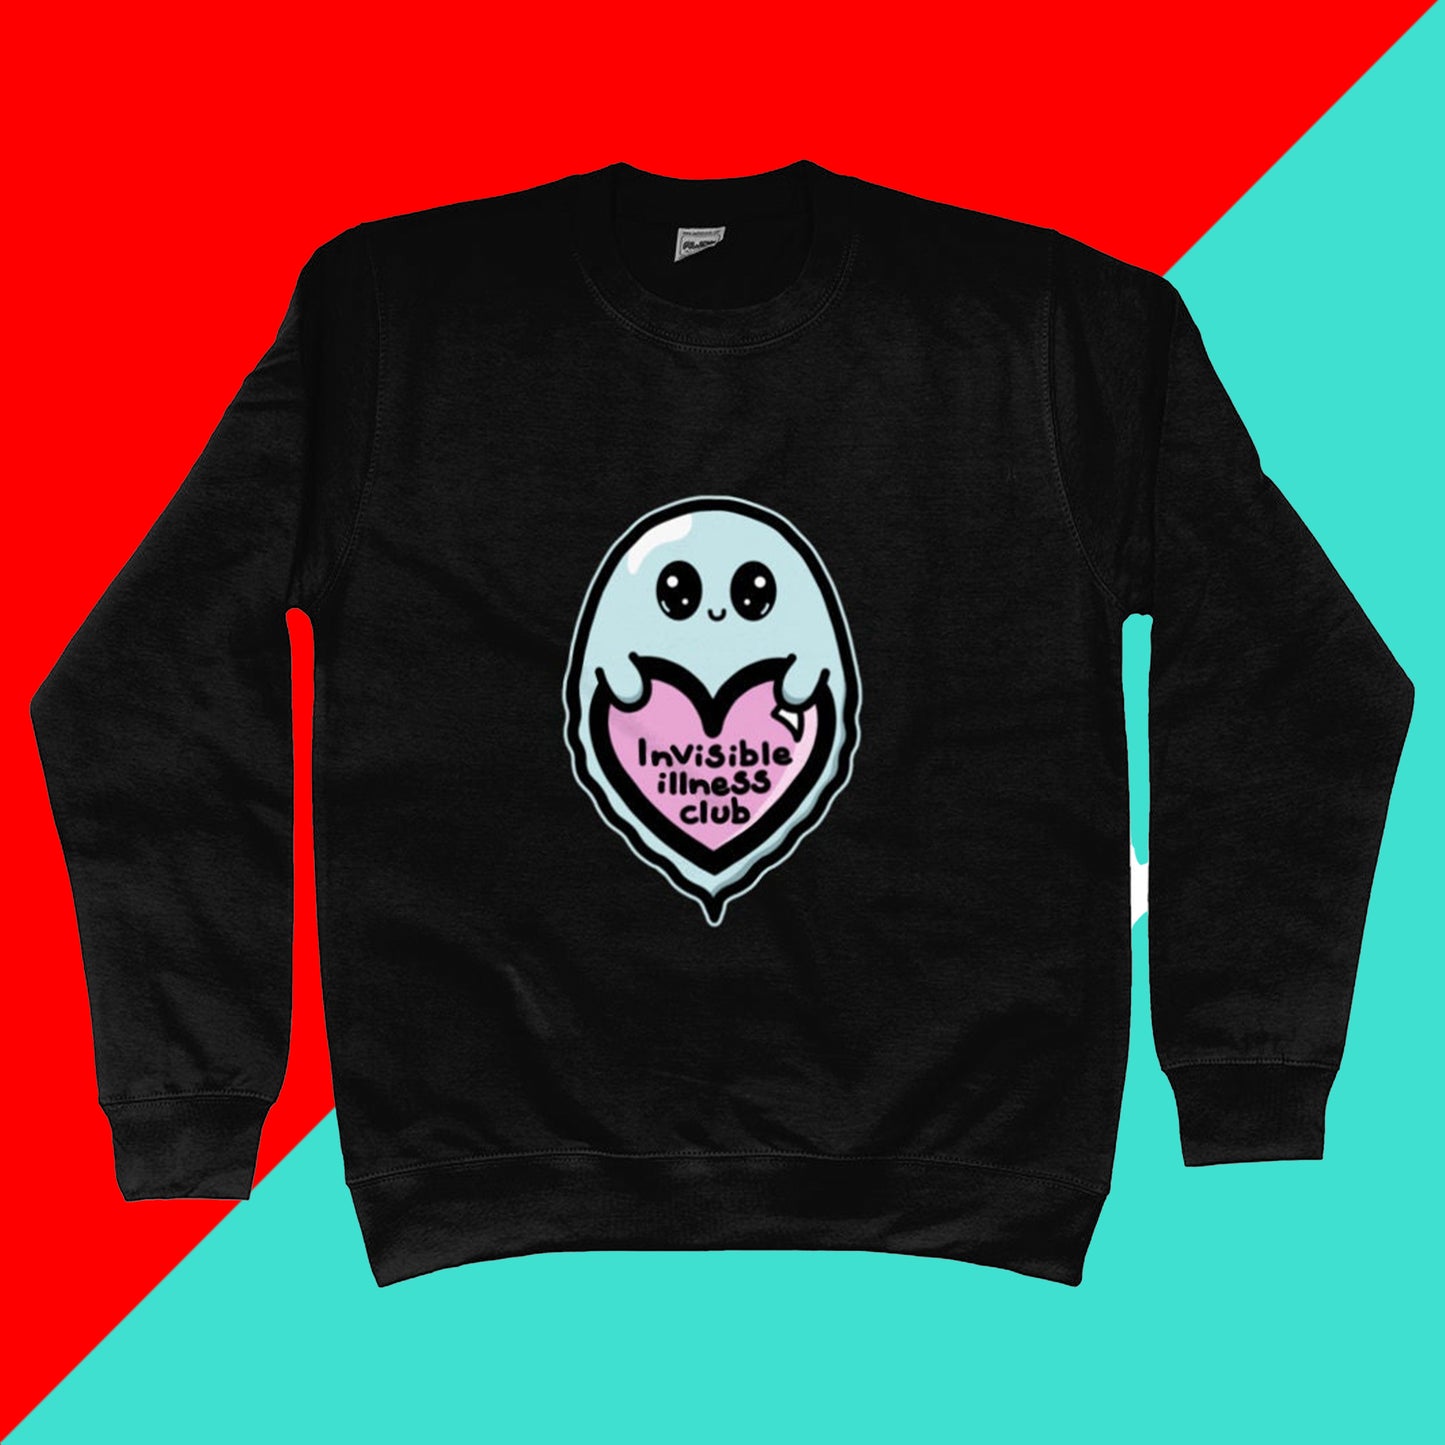 The Invisible Illness Club Sweatshirt Jumper on a red and blue background. The black sweater features a smiling pastel blue ghost with big sparkly eyes holding up a pastel pink heart with black text reading 'invisible illness club'. The hand drawn design is raising awareness for hidden disabilities.